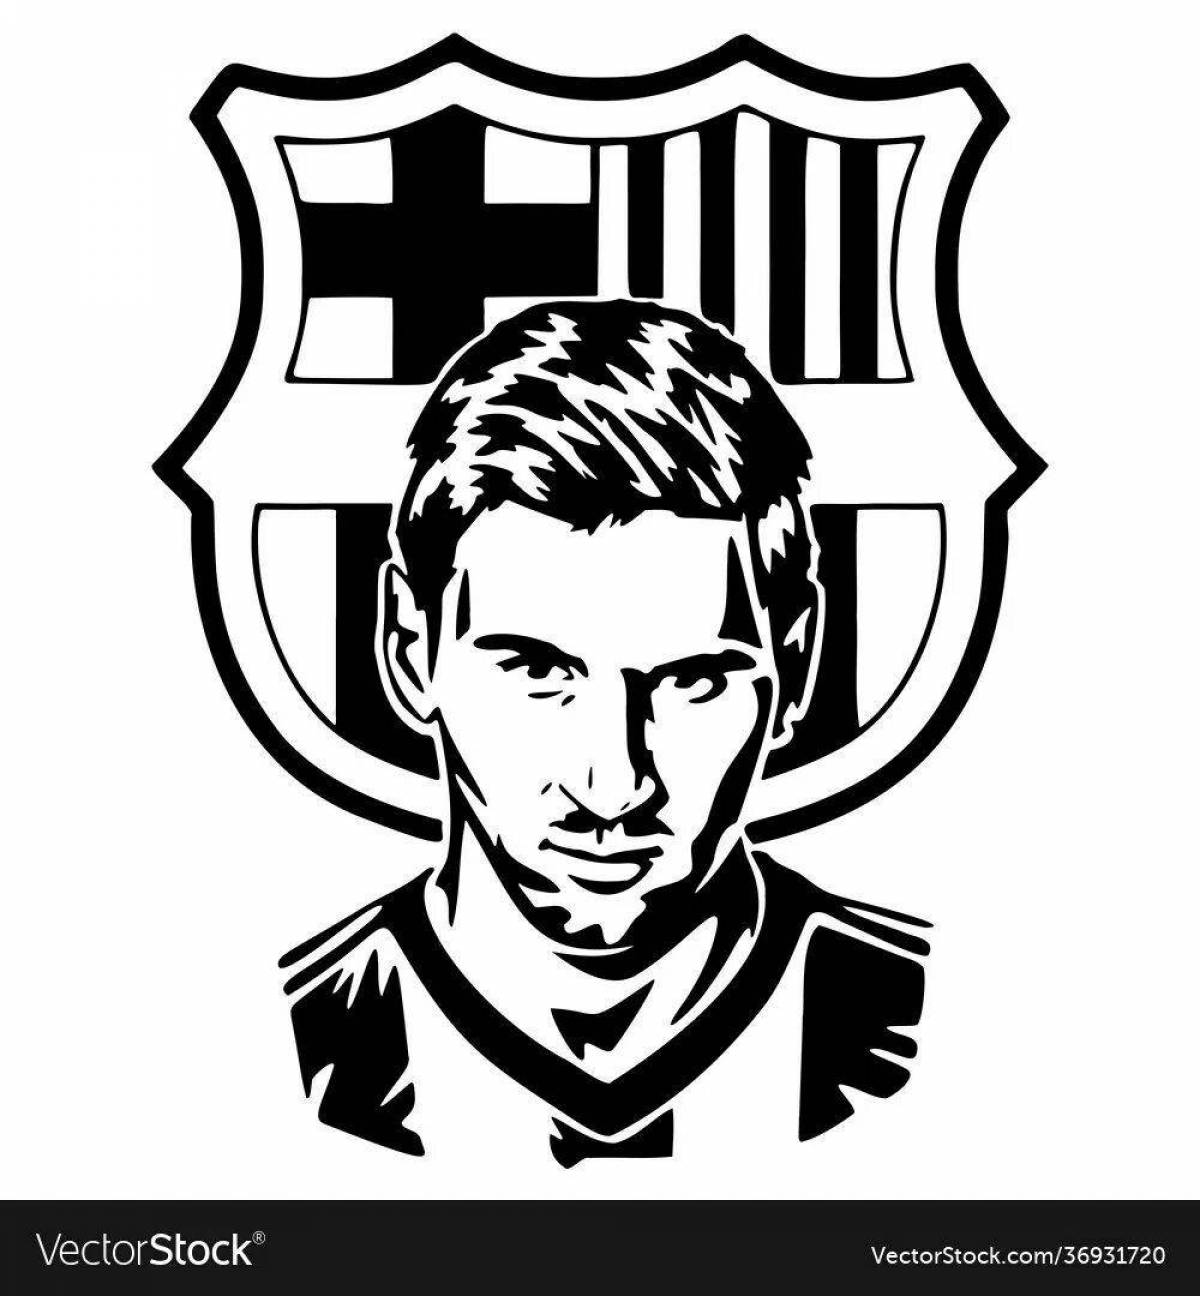 Coloring page great football club barcelona